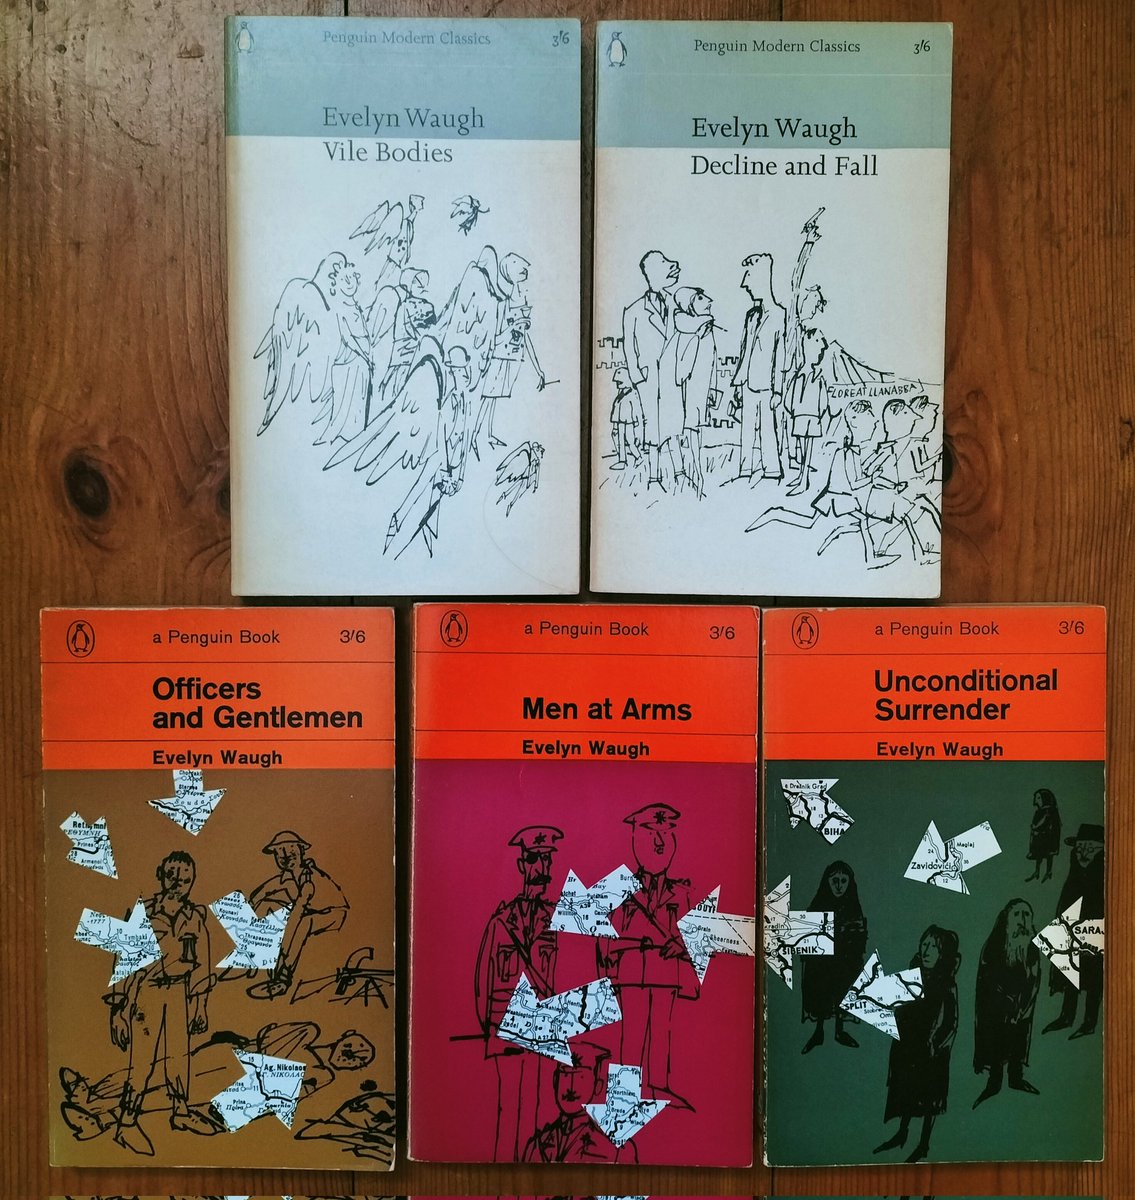 More #Penguin paperbacks by #EvelynWaugh with #bookcovers by #QuentinBlake 
#vintagepaperbacks 
#PenguinModernClassics